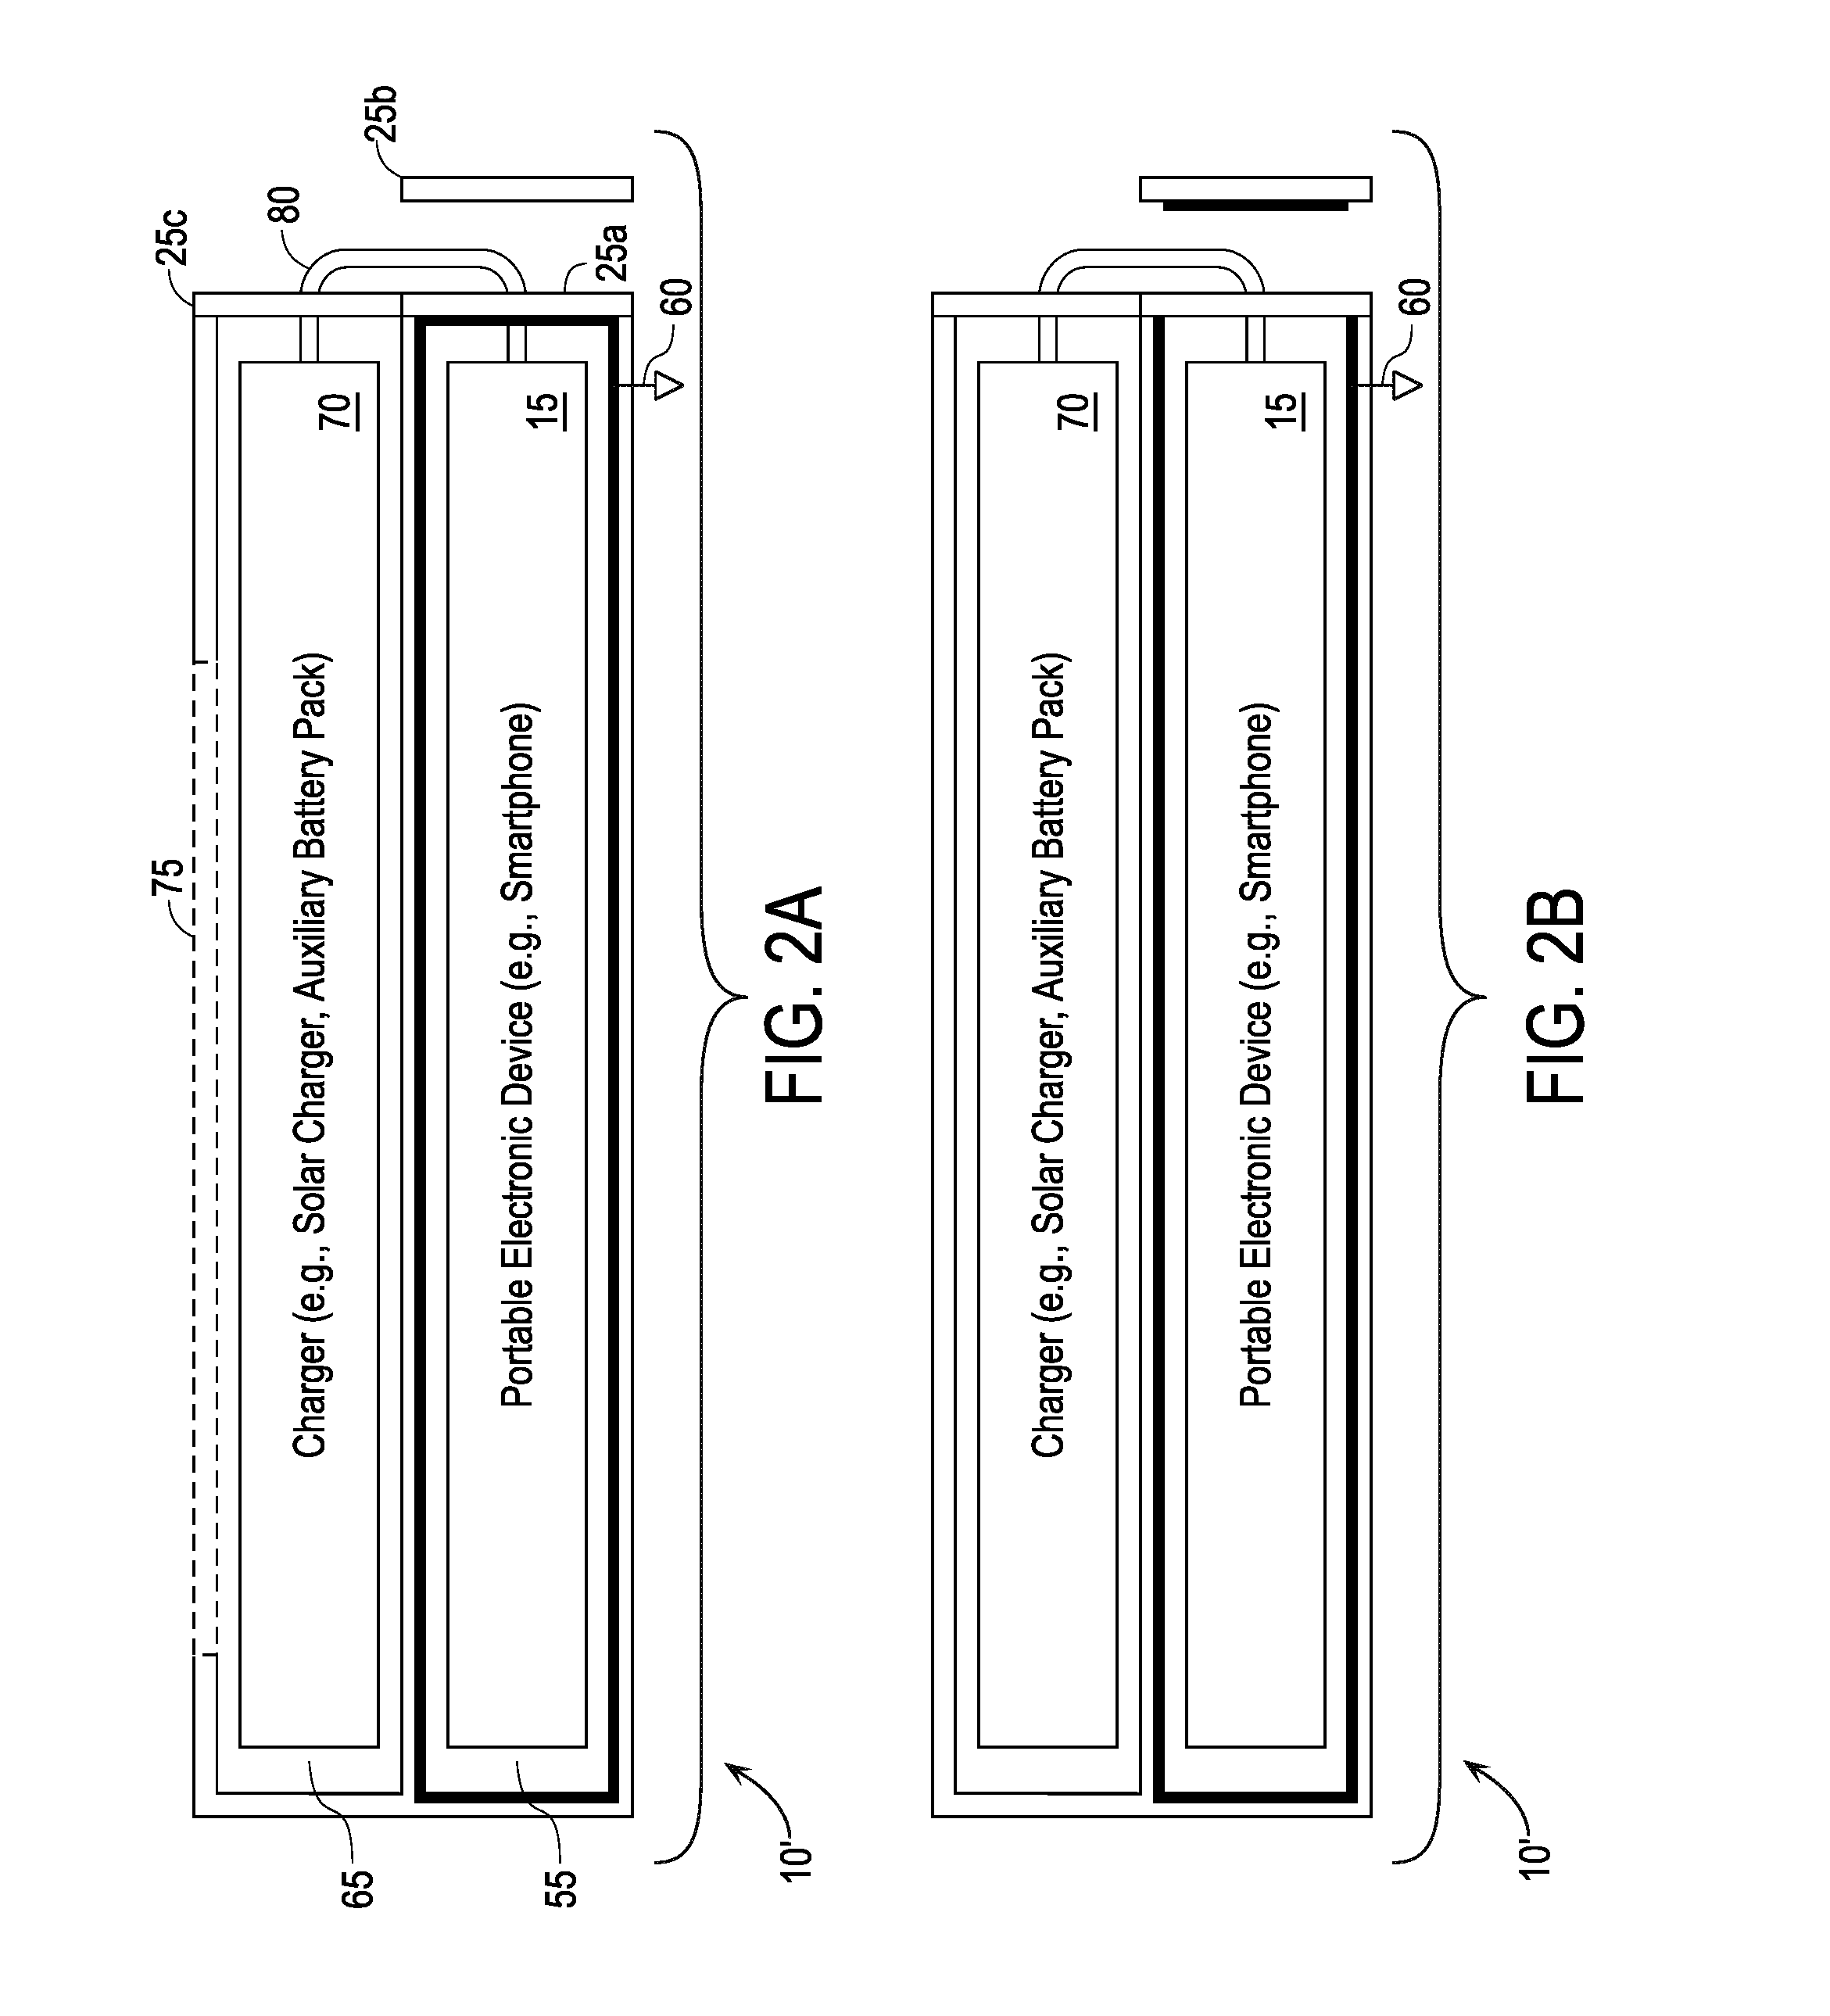 Configurable Shield for Hand-Held Electronic Device